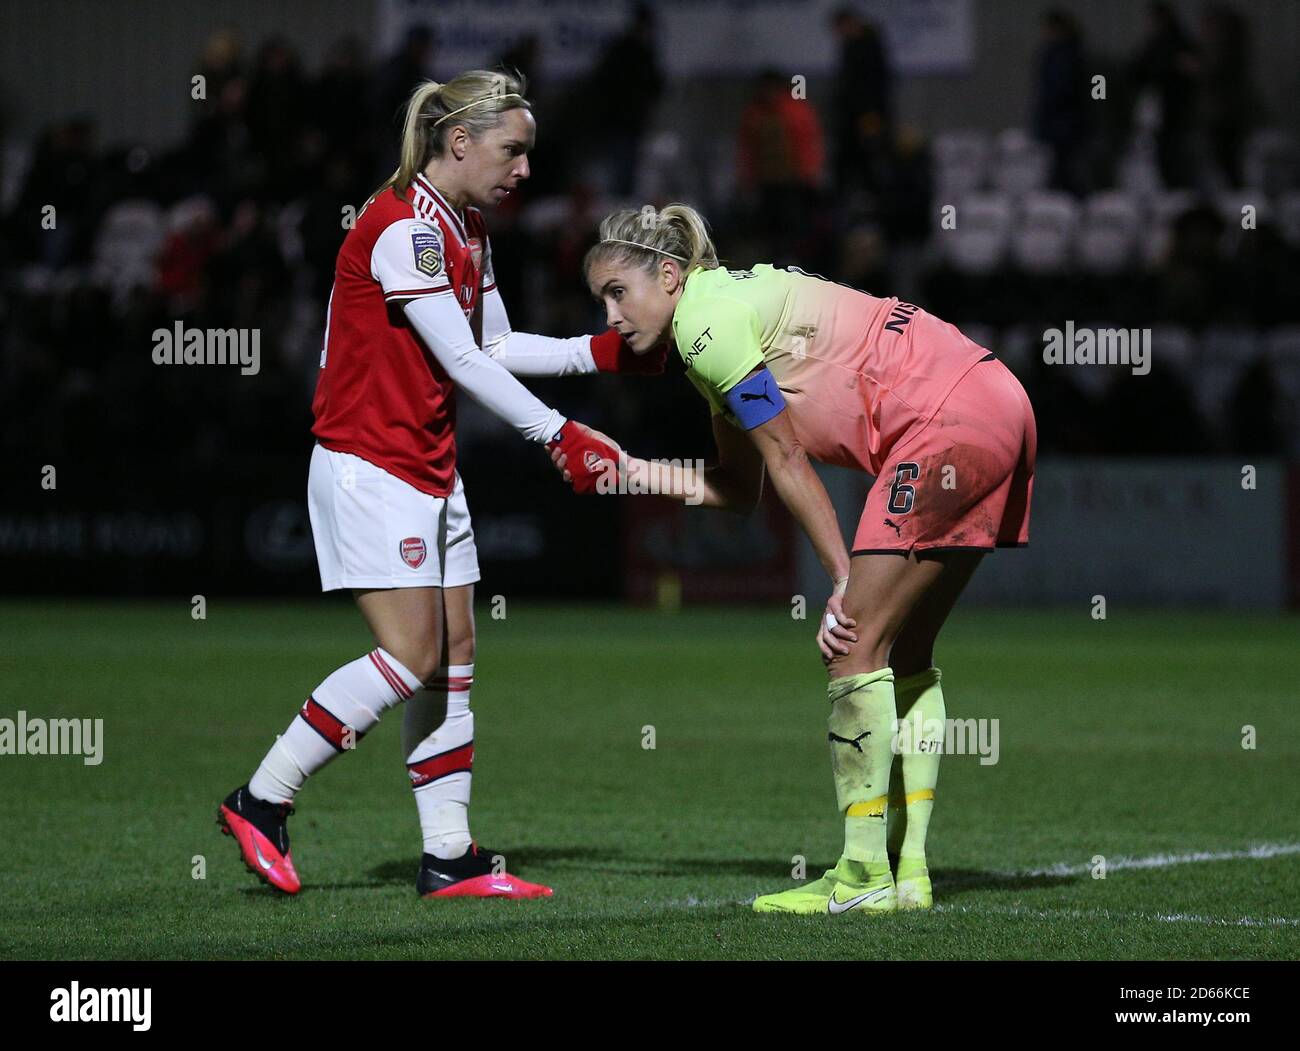 Arsenal's Jordan Nobbs (left) consoles Manchester City's Steph Houghton  after the game Stock Photo - Alamy